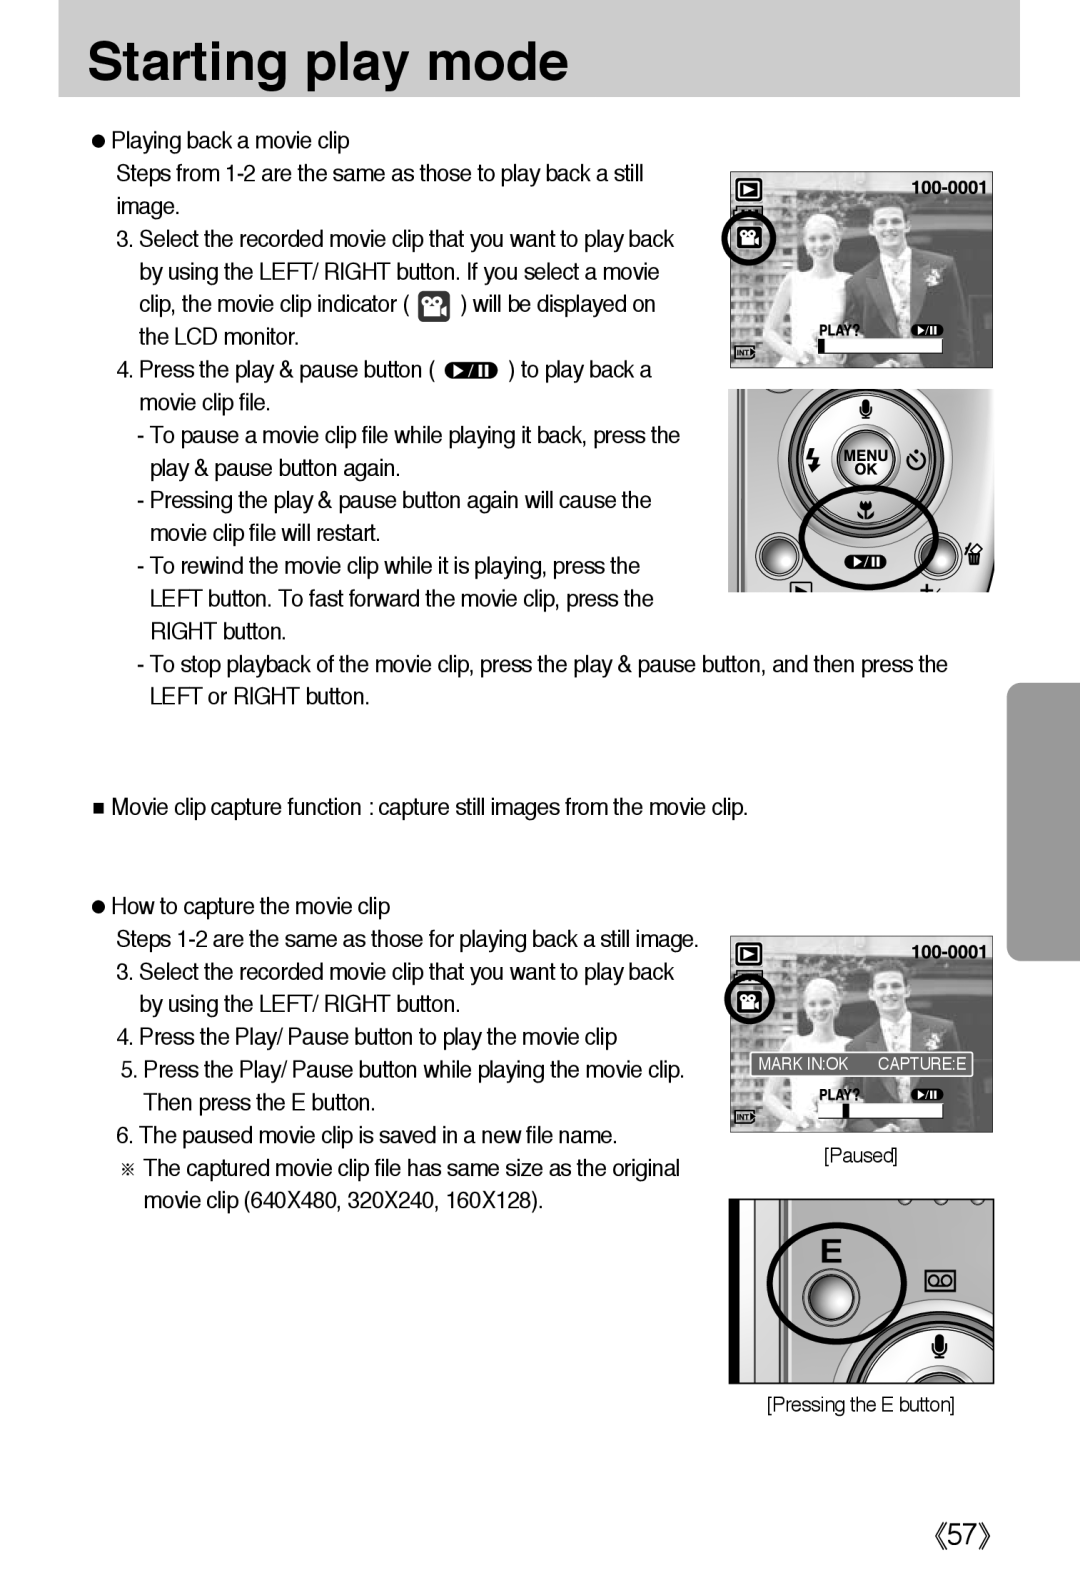 Samsung L50 user manual 《57》, Starting play mode, Steps 1-2 are the same as those for playing back a still image 